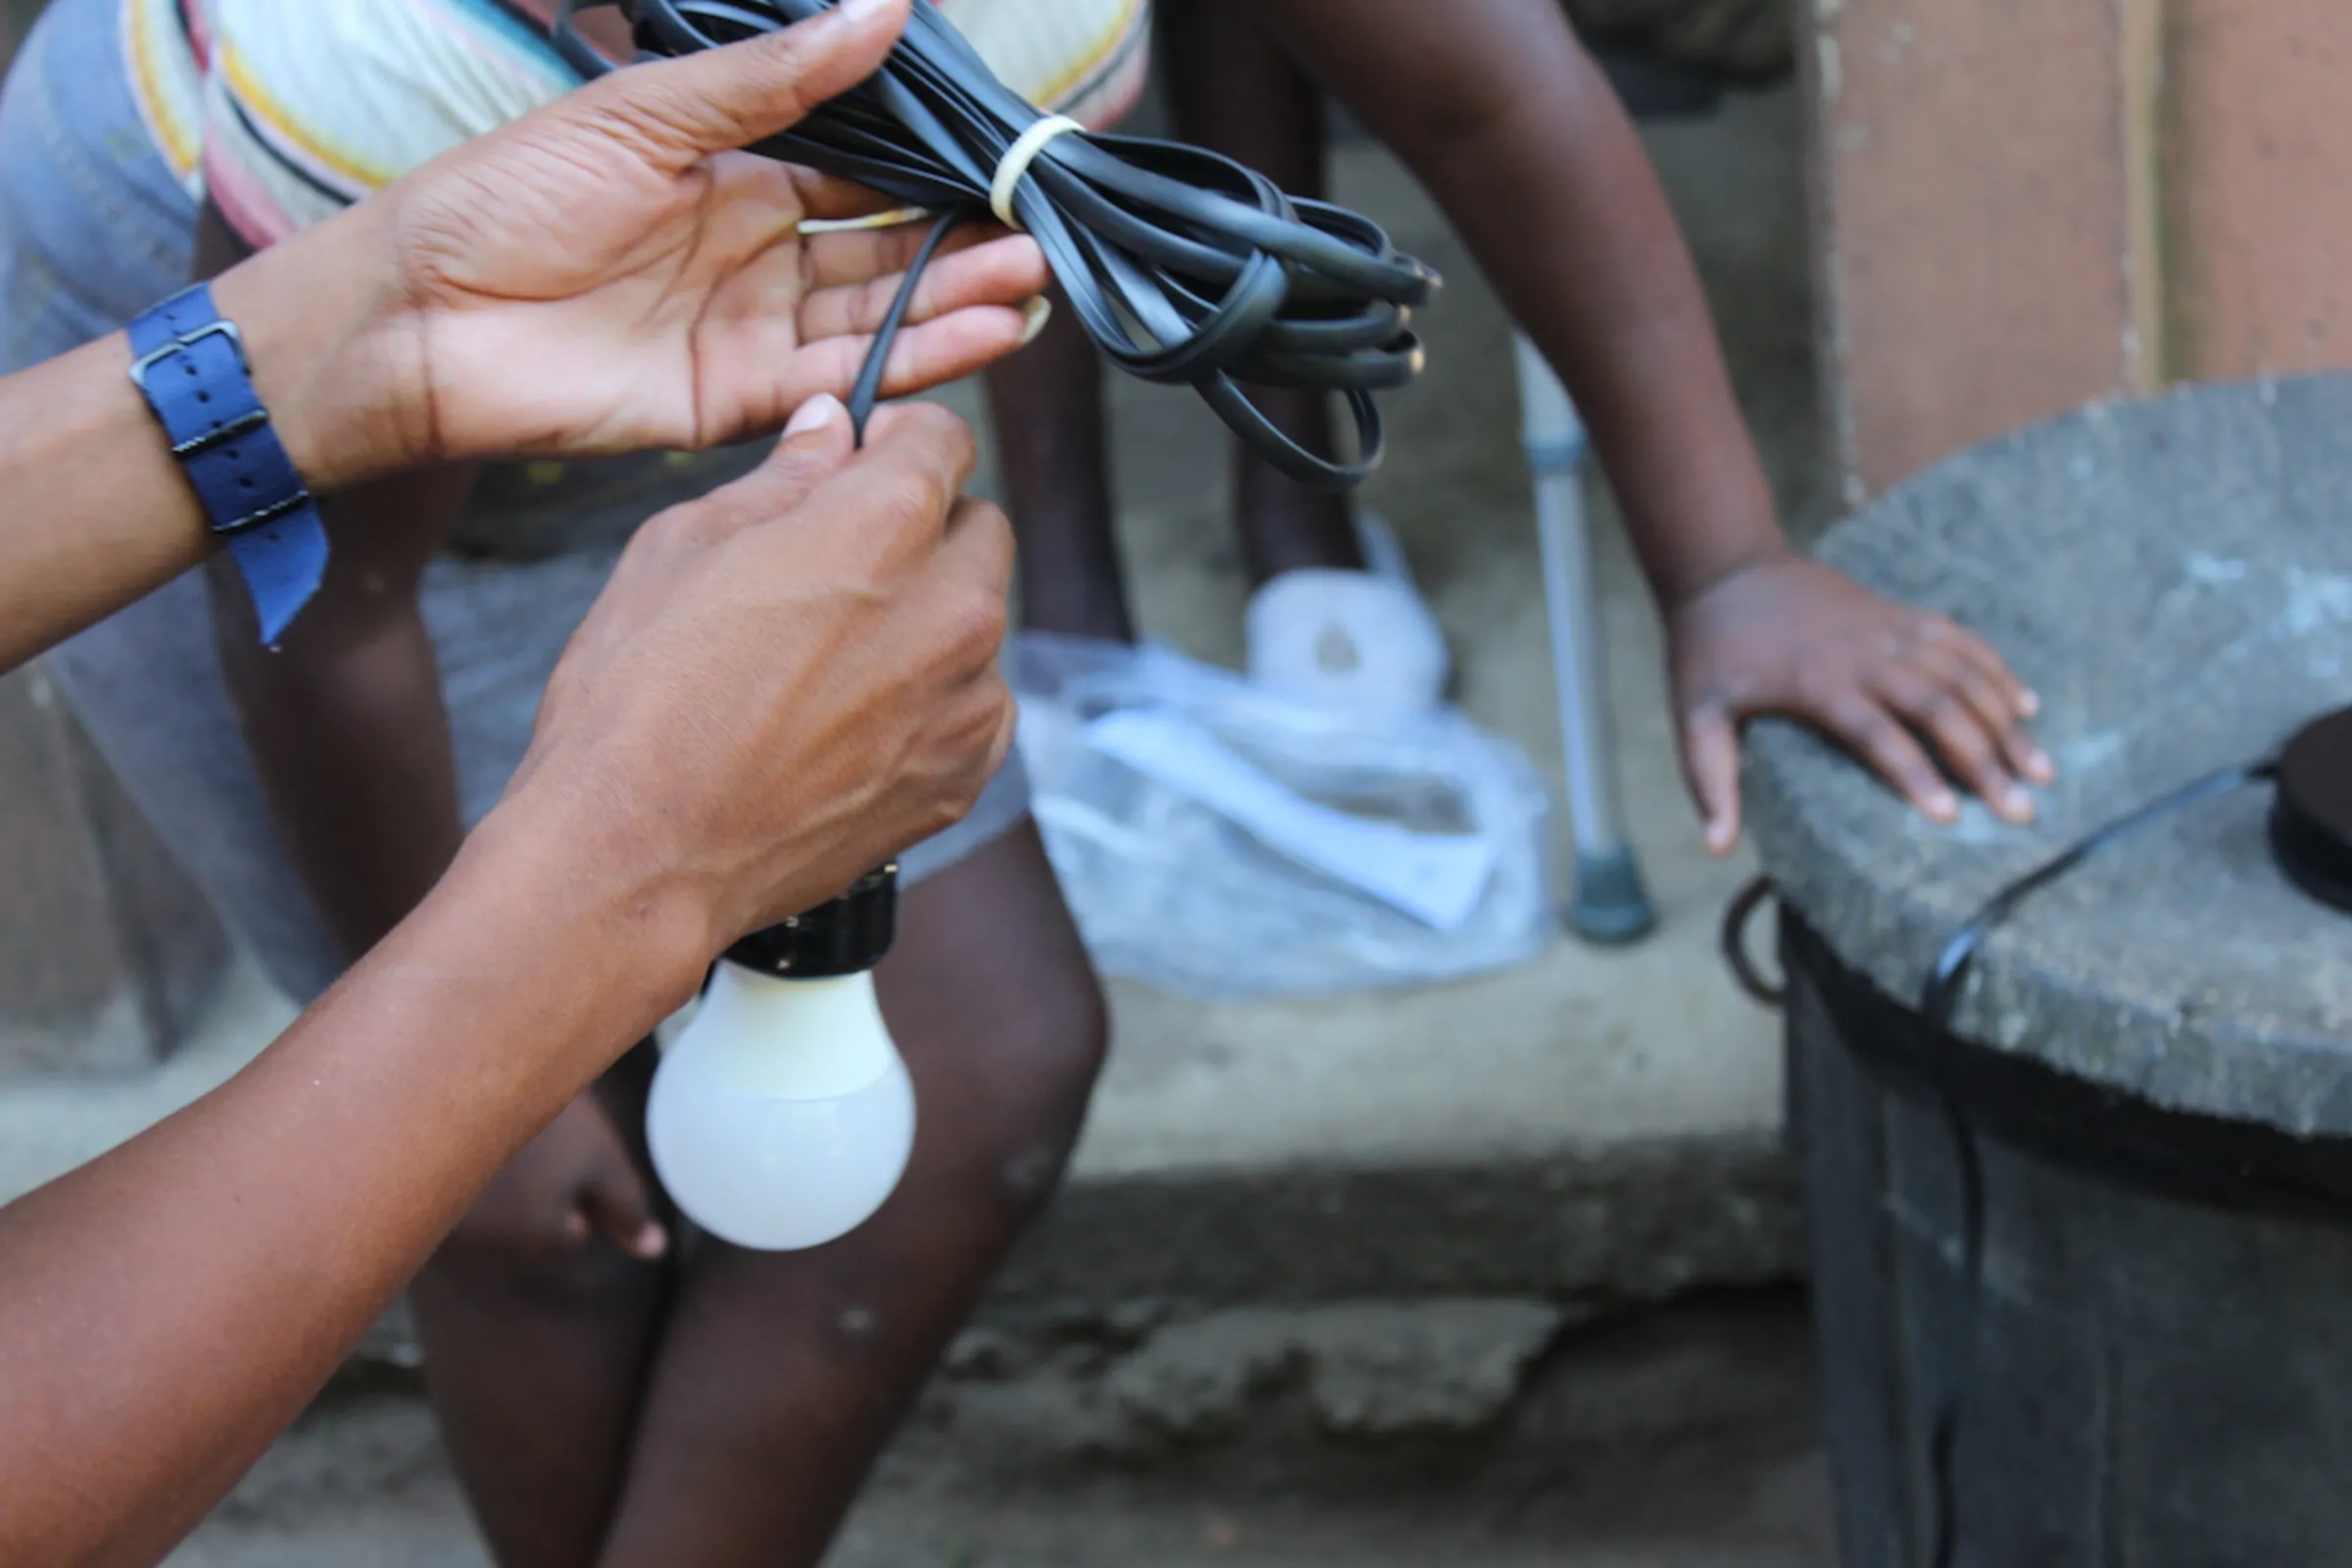 The team at Light Up A Home (LUAH) helps connect a lightbulb to their solar panel device in Sheffield Informal Settlements KwaDukuza, KwaZulu-Natal, South Africa January 2021. Balwin Foundation/Handout via Thomson Reuters Foundation